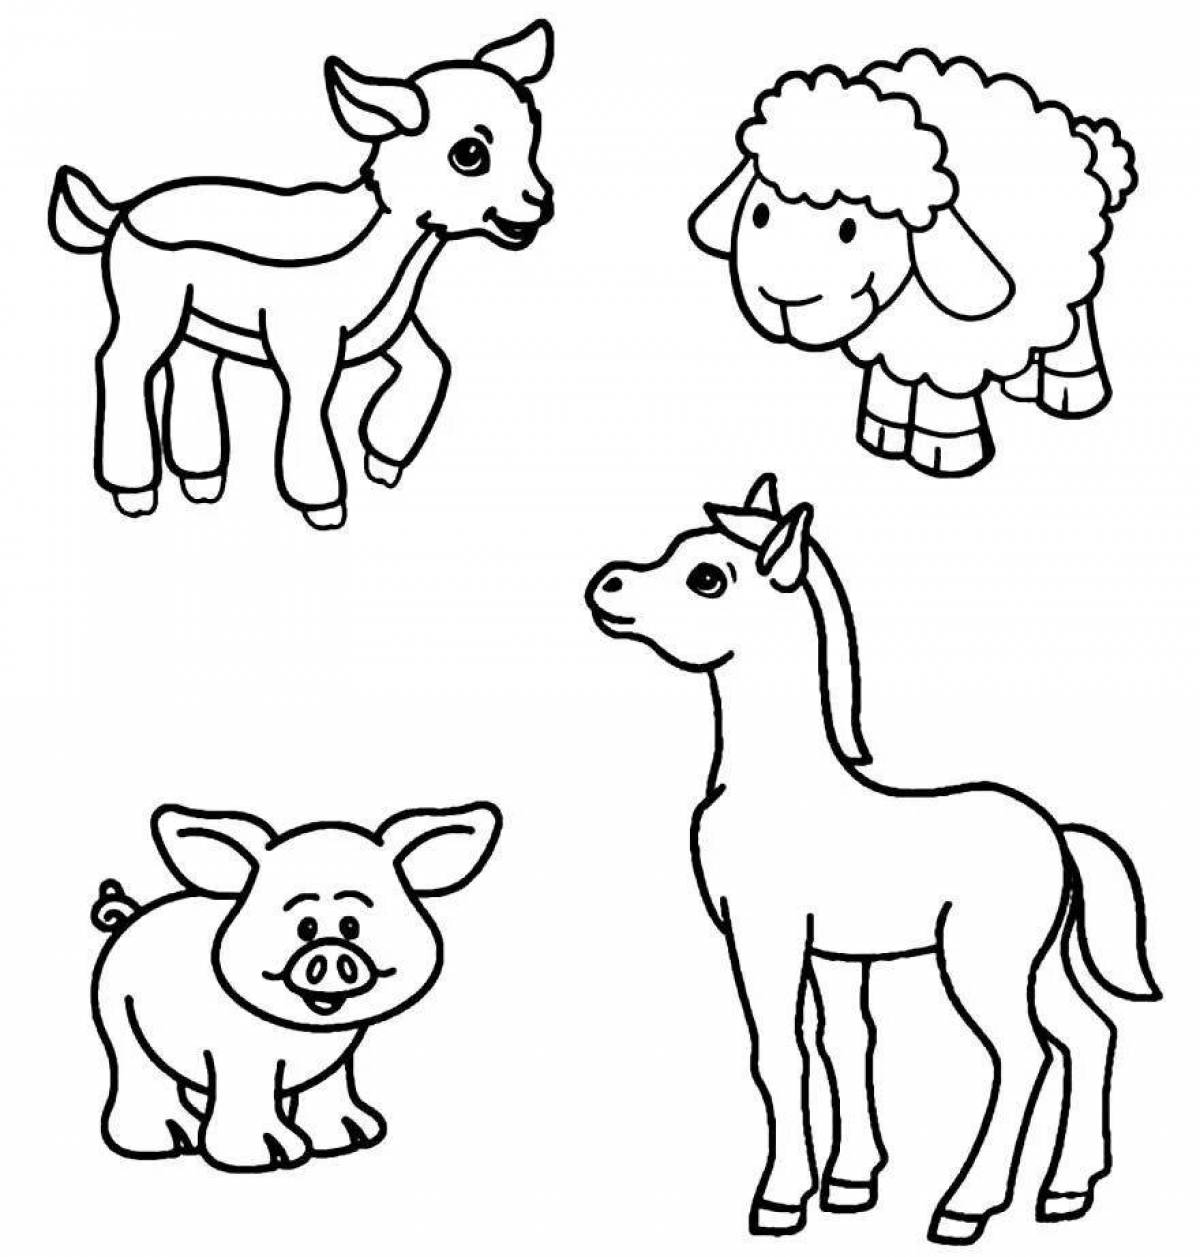 Live coloring pages of pets